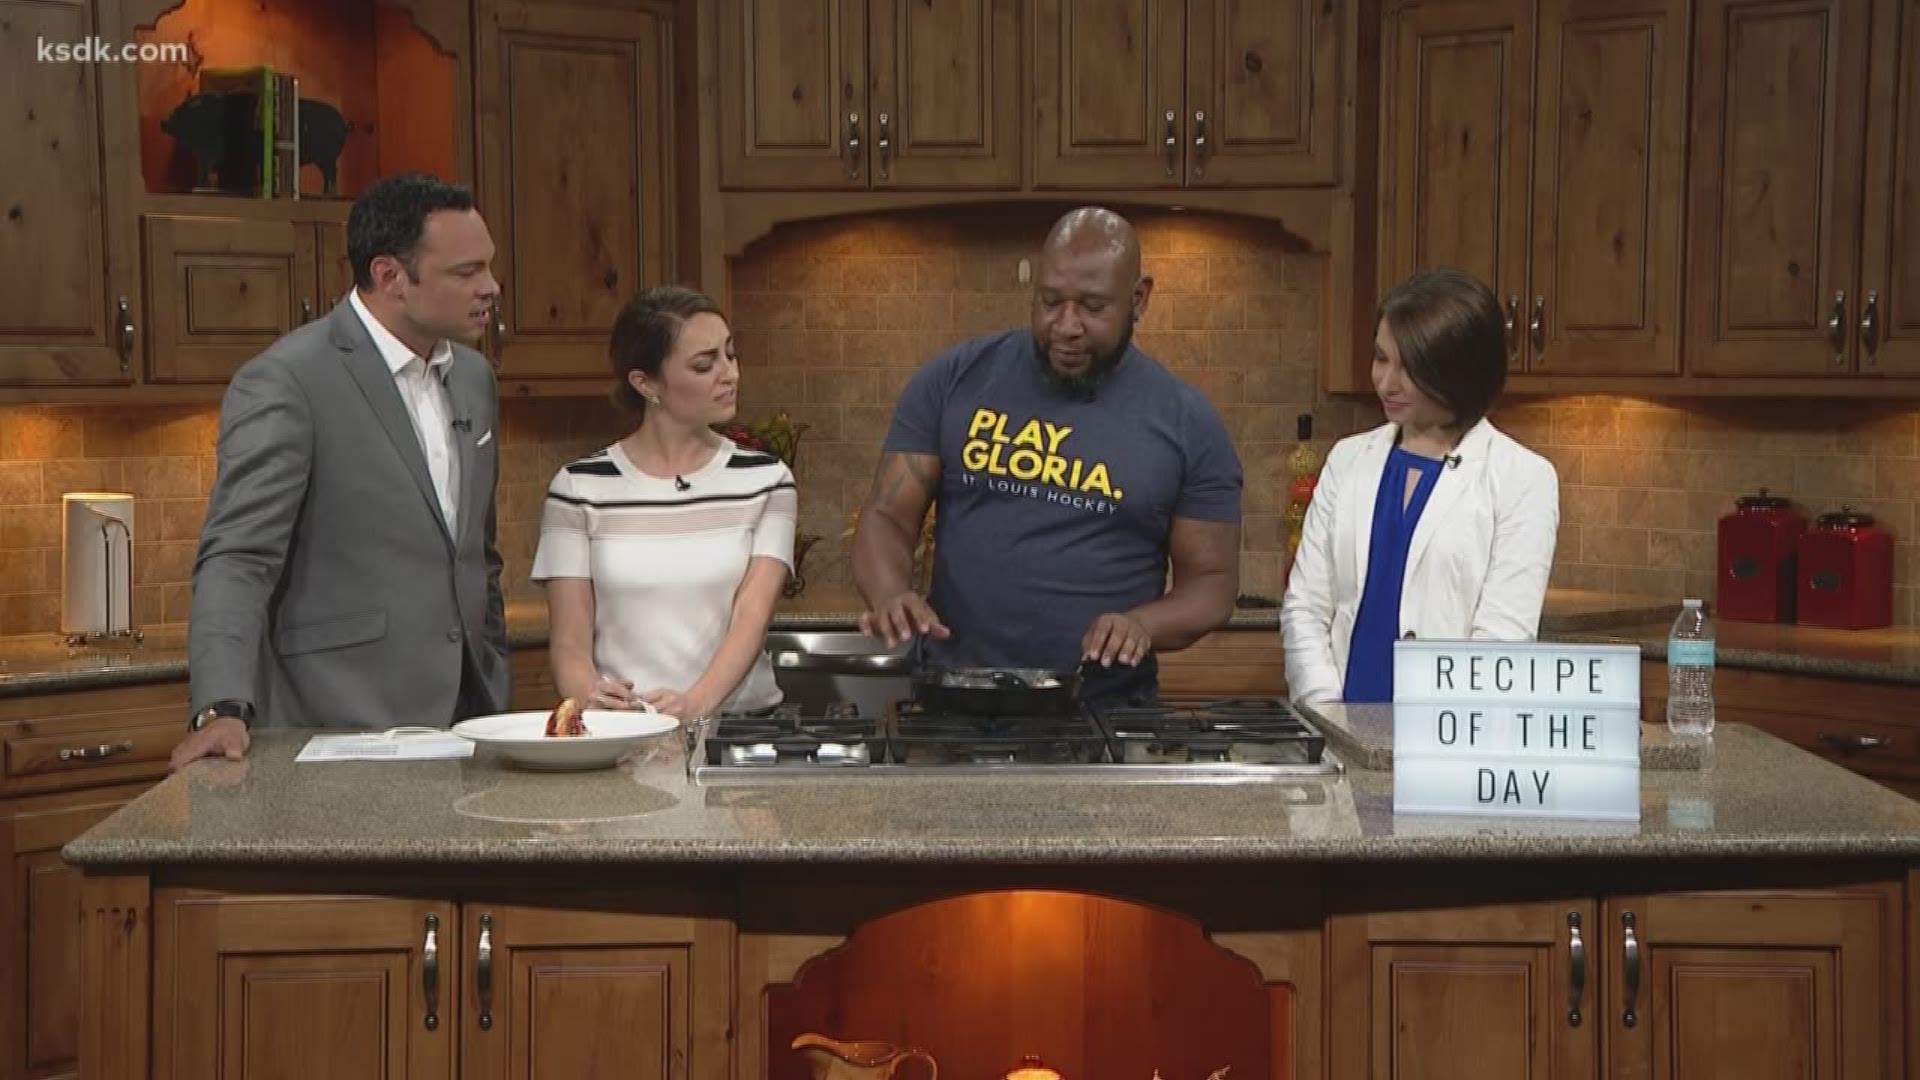 CJ Williams is a personal chef and the man behind the delicious looking photos posted on Instagram under the handle EdibleArt314. This morning he shared a delicious recipe with Show Me St. Louis viewers.